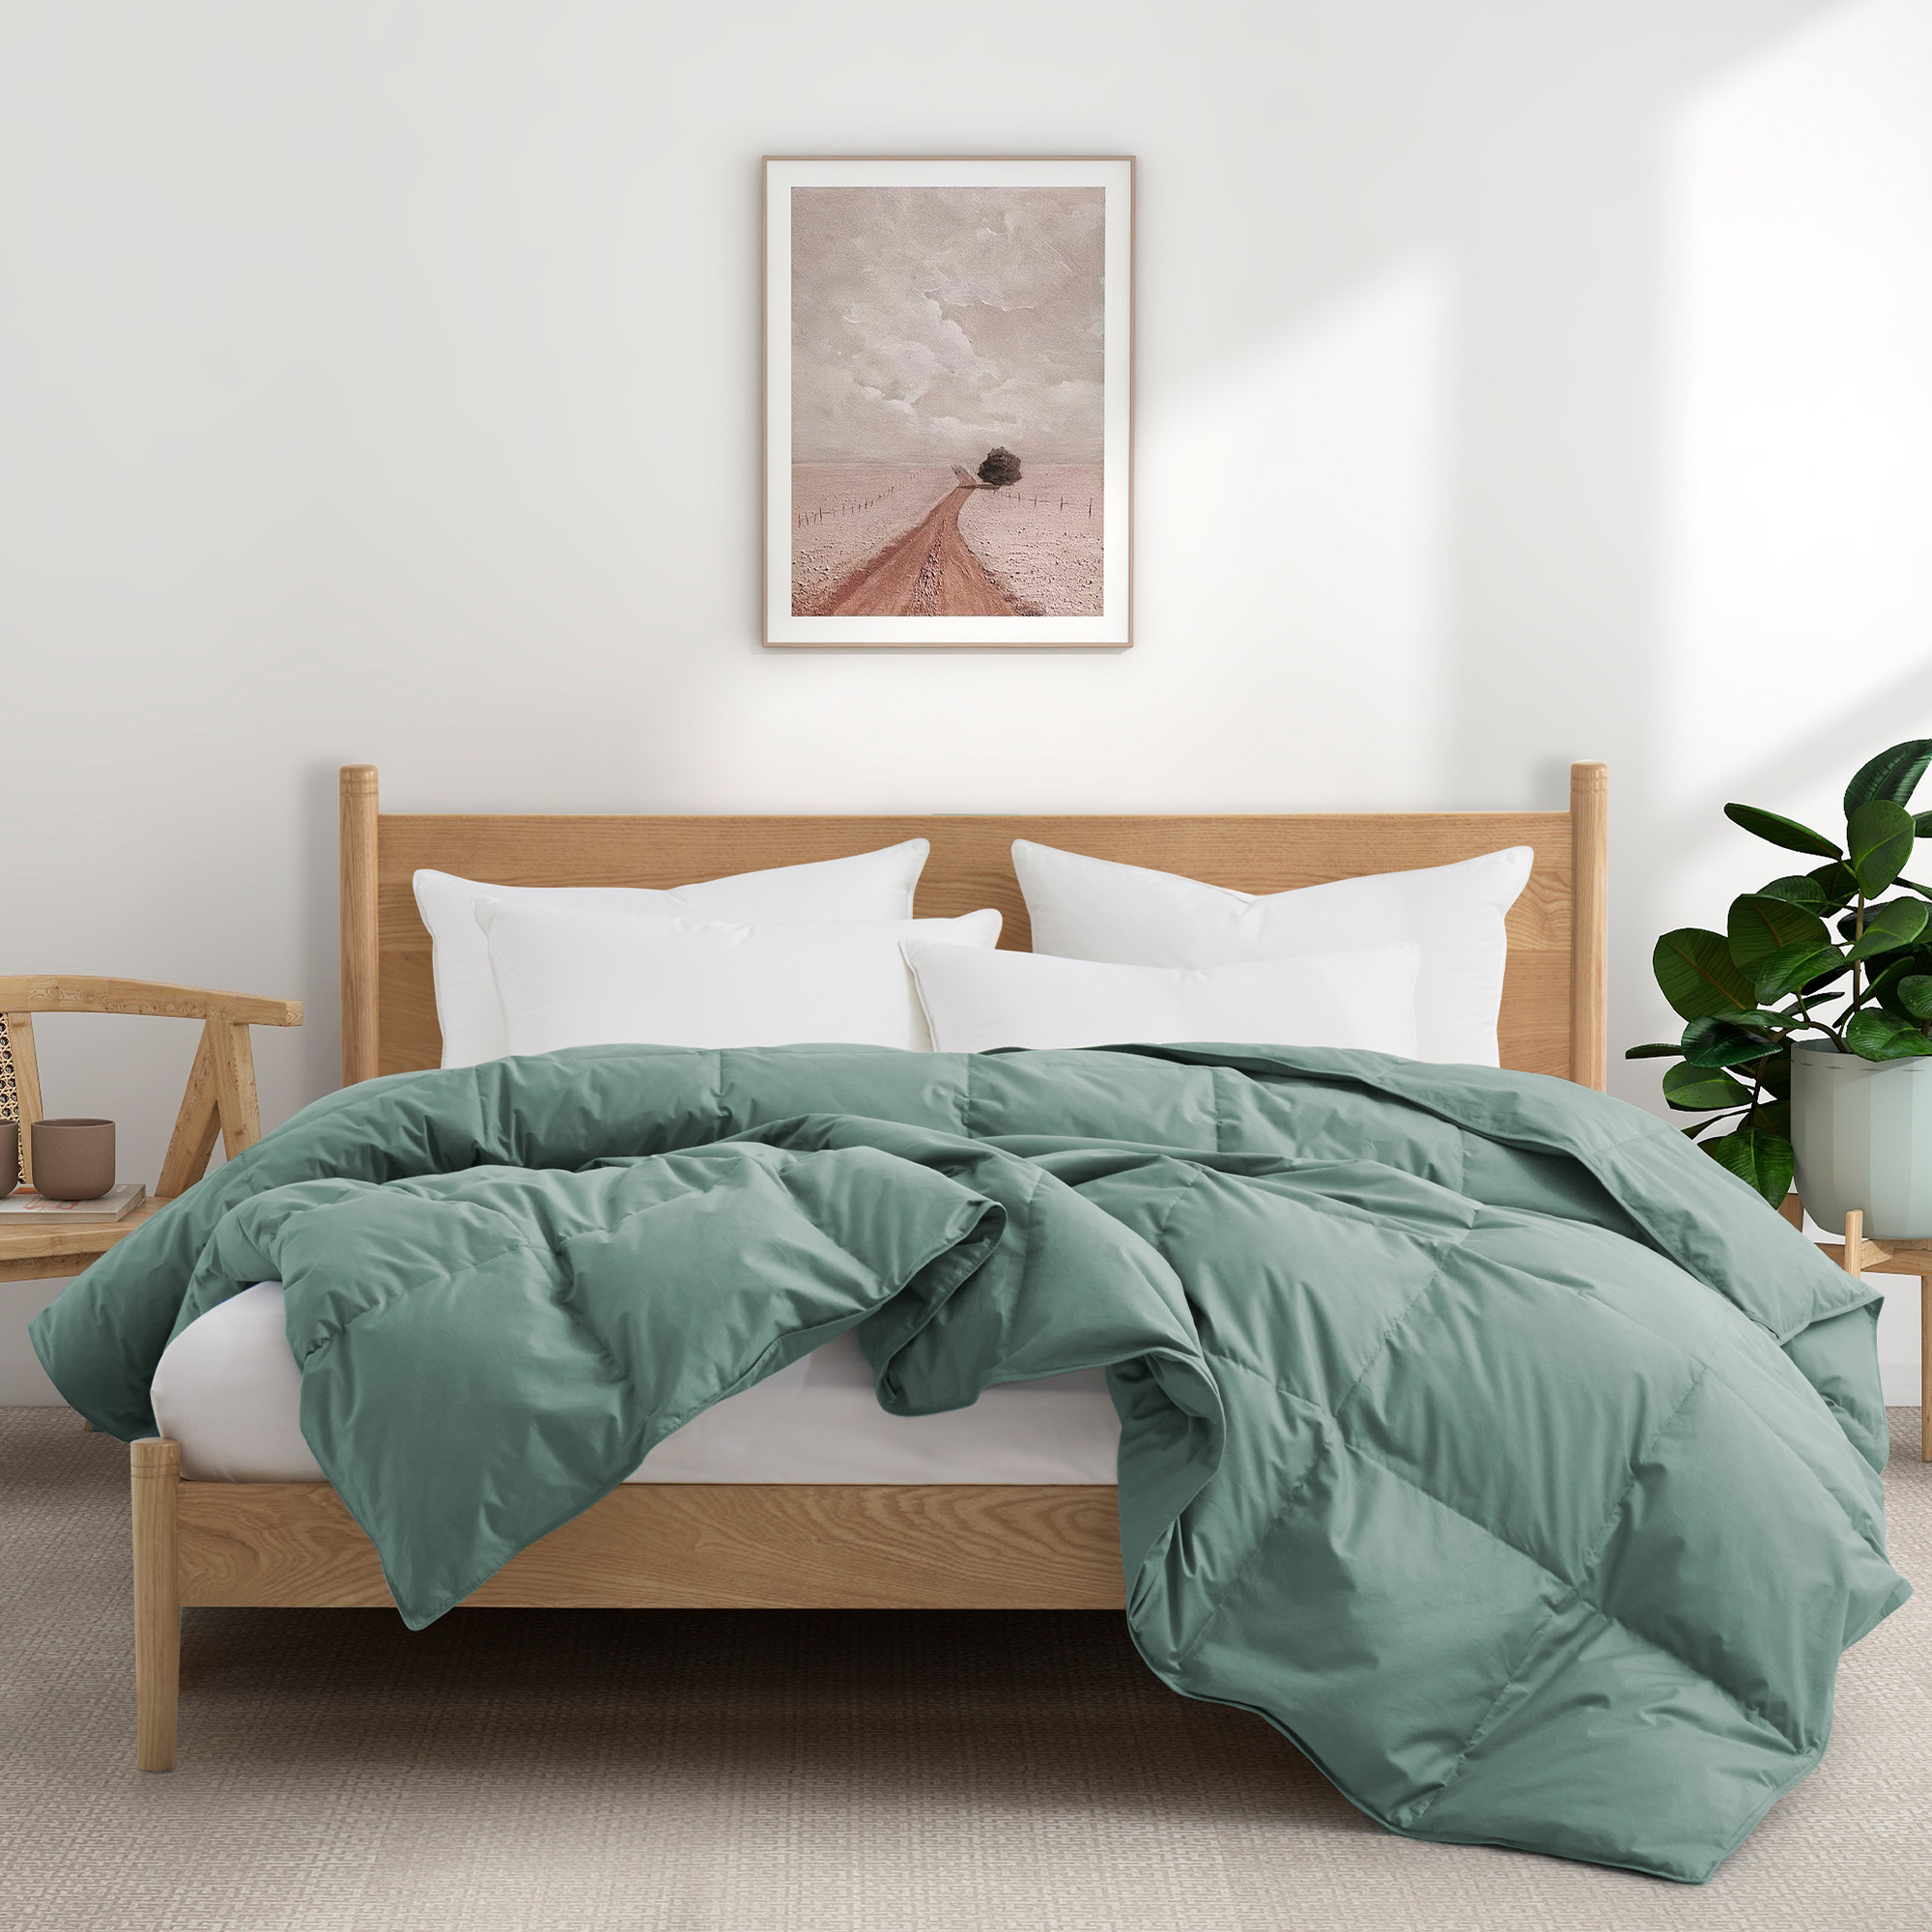 All Season Organic Cotton Comforter Filled With Down And Feather Fiber - Laurel Green, King